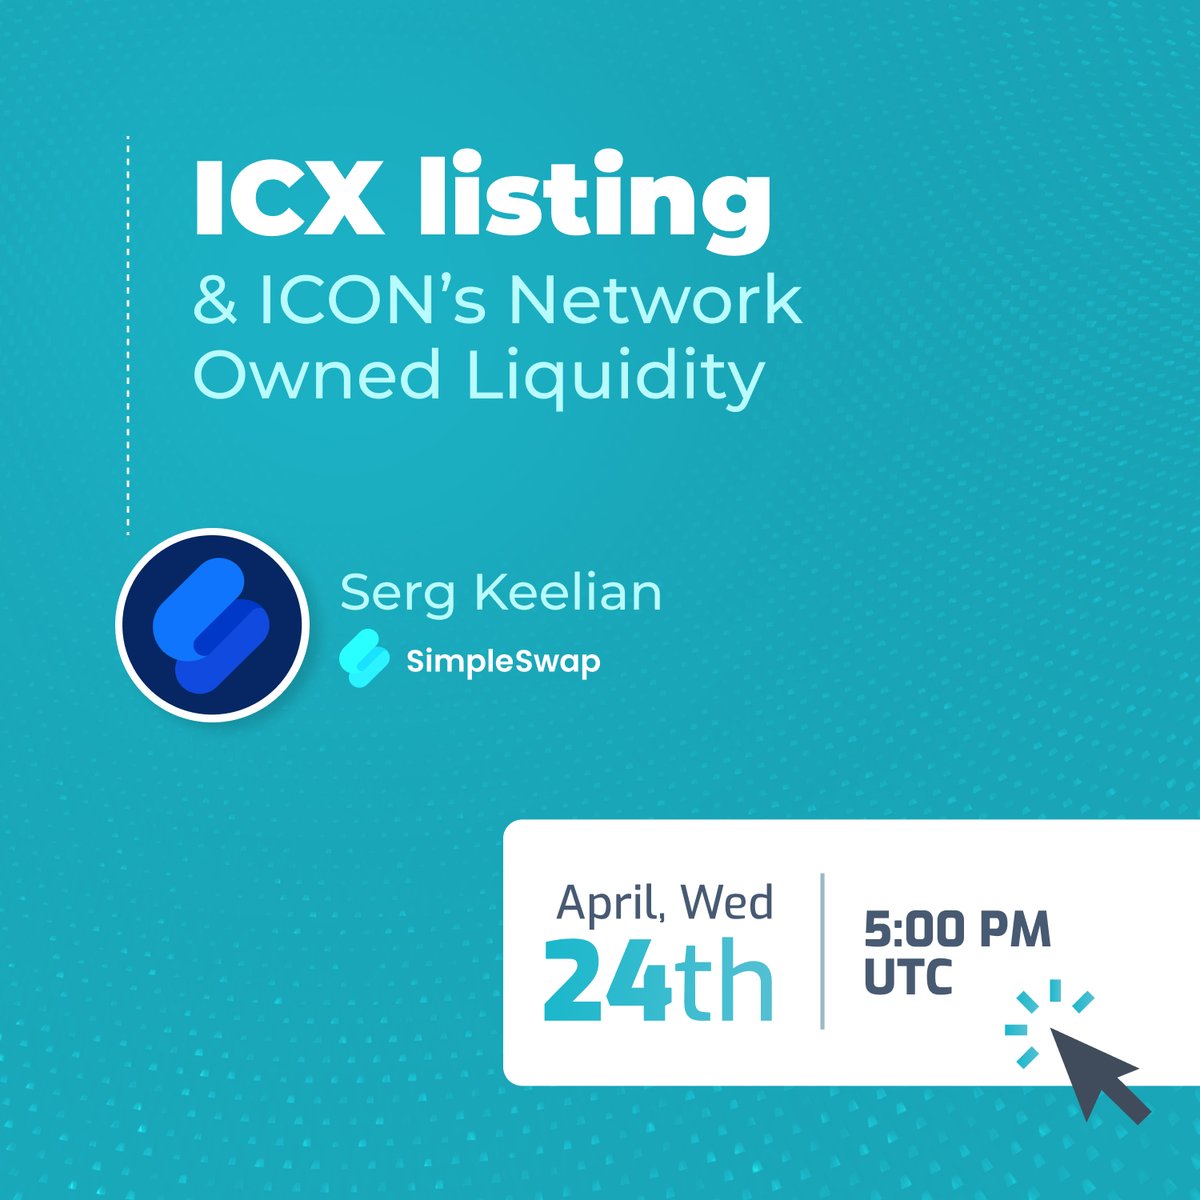 PSA: Don't miss our community space this Wednesday @ 5PM UTC 🎙️ @SimpleSwap_io join us in discussing cross-chain swap options for the @helloiconworld ecosystem and Network Owned Liquidity 🌊 $ICX 👉 x.com/i/spaces/1dRJZ…